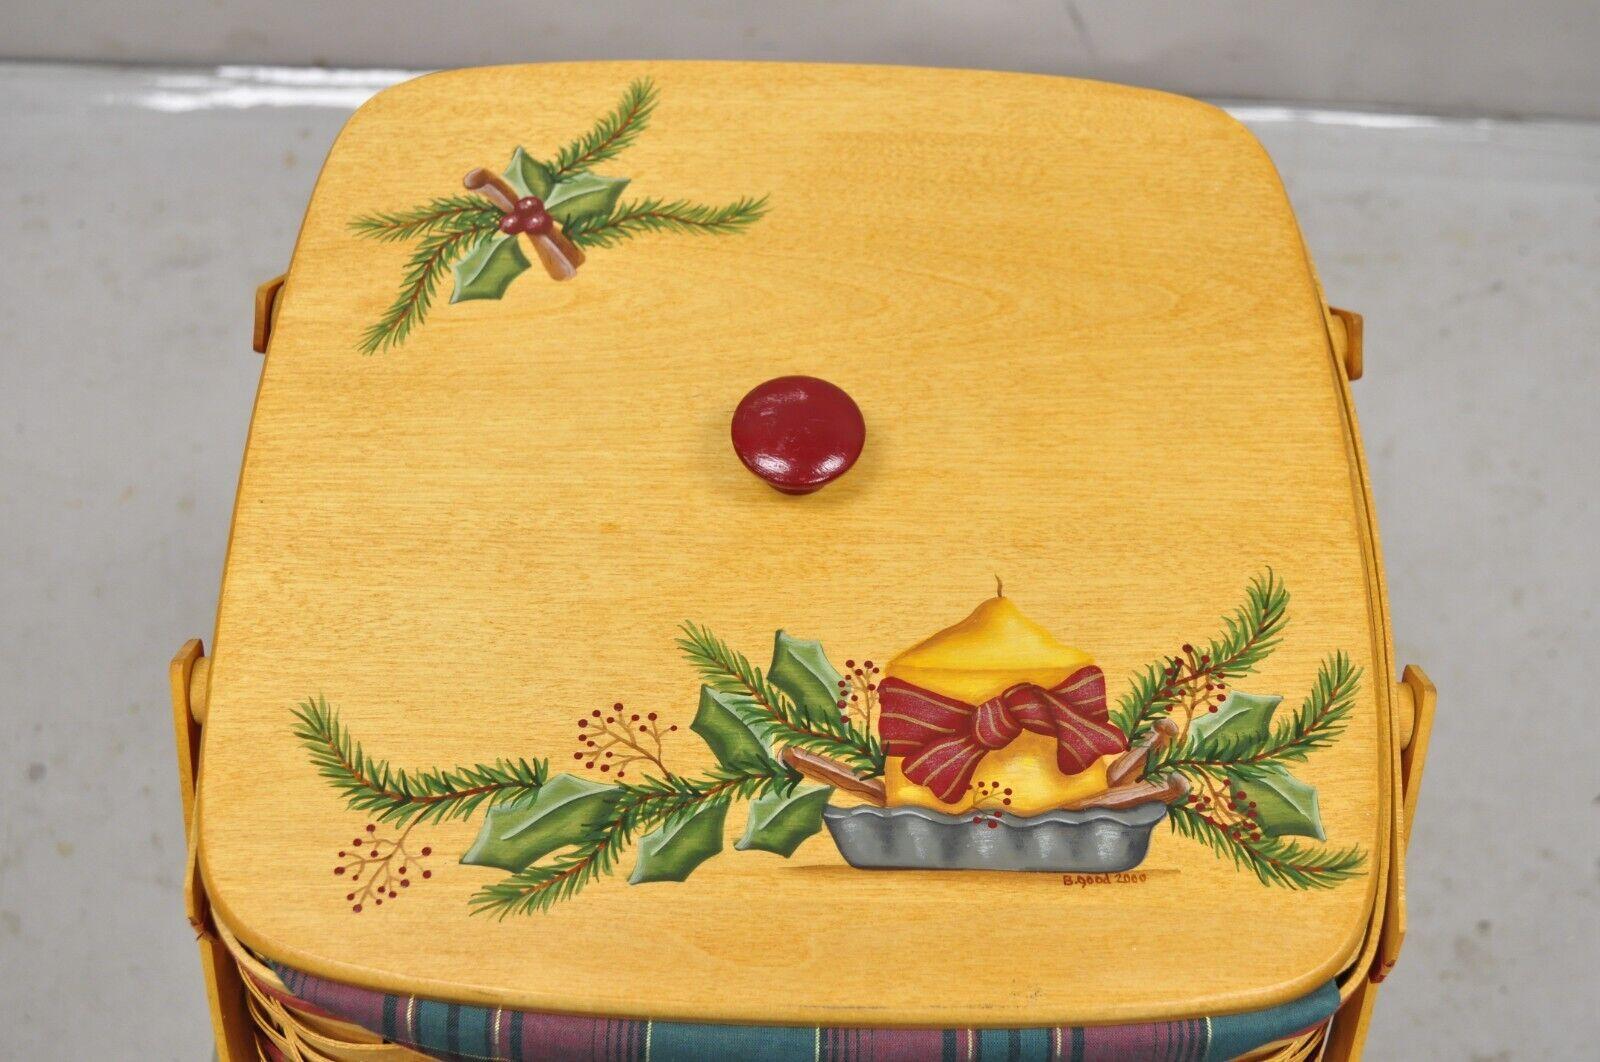 American Classical Longaberger 2000 Holiday Hostess 12 Days of Christmas Basket 17833 Lid & Liners For Sale